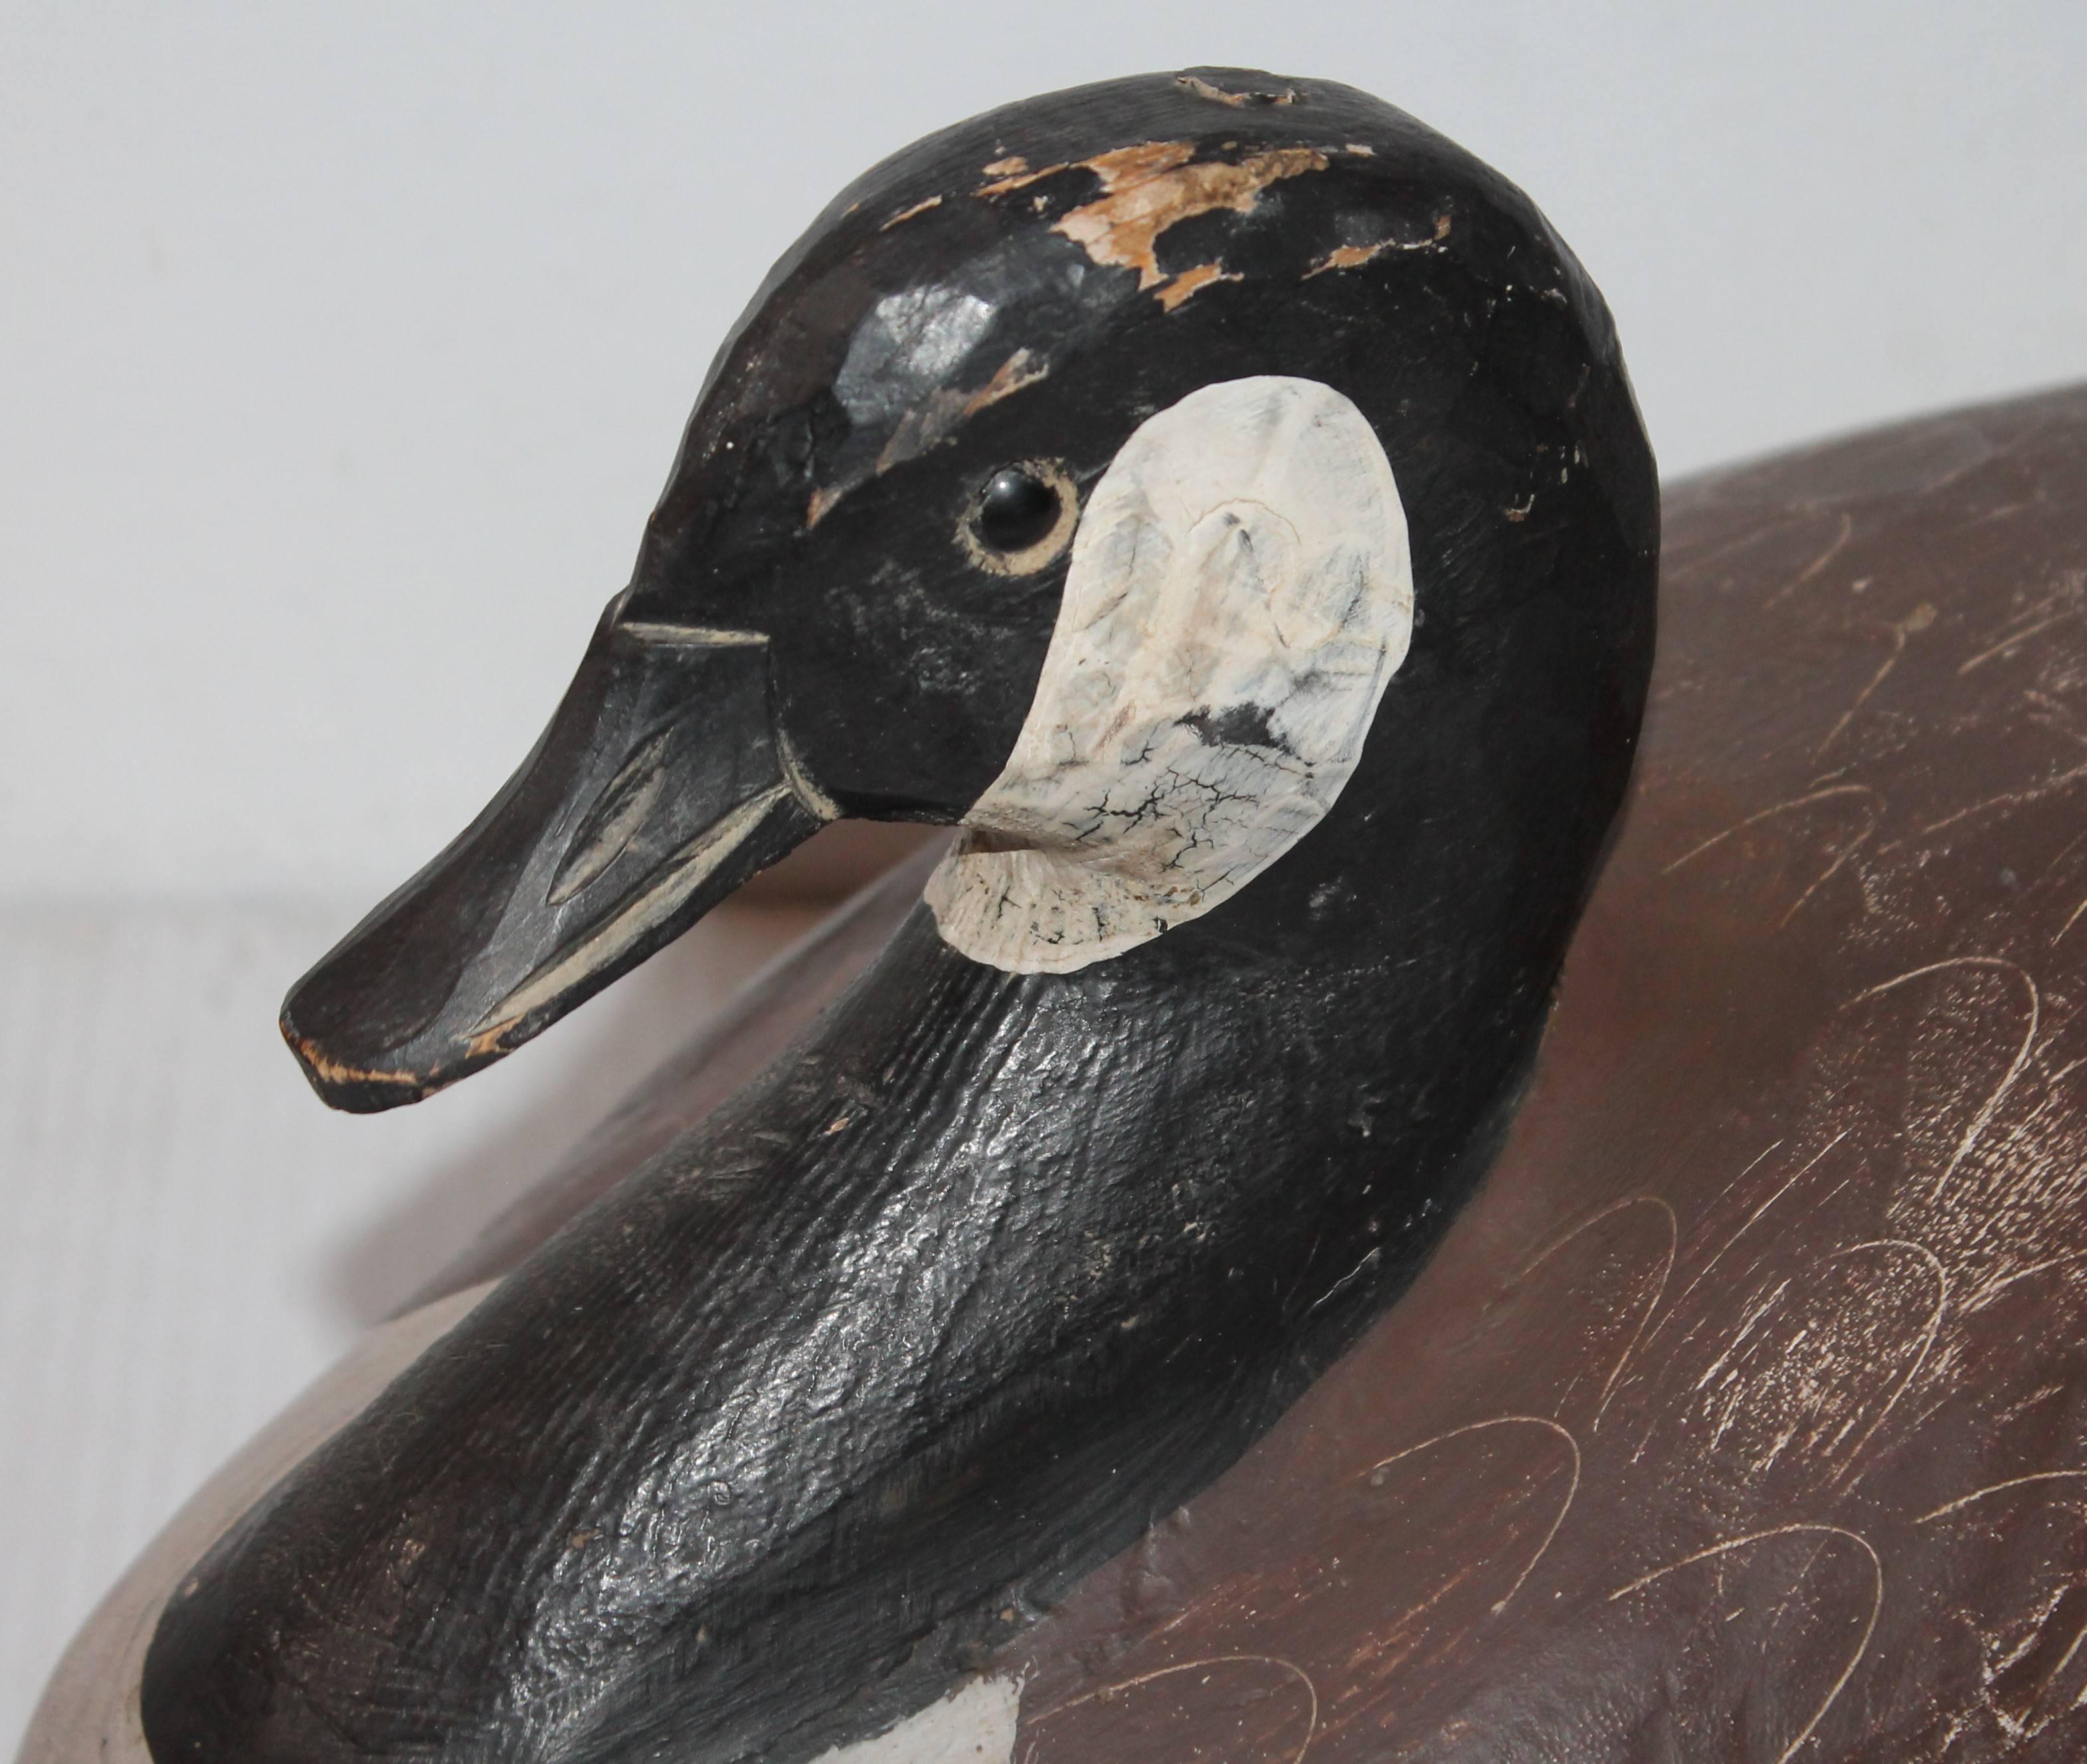 This fine example of Folk Art carved goose is in great as found condition. Minor wear consistent with age and use. This is a very heavy and solid bird. Wonderful details in the painted surface.